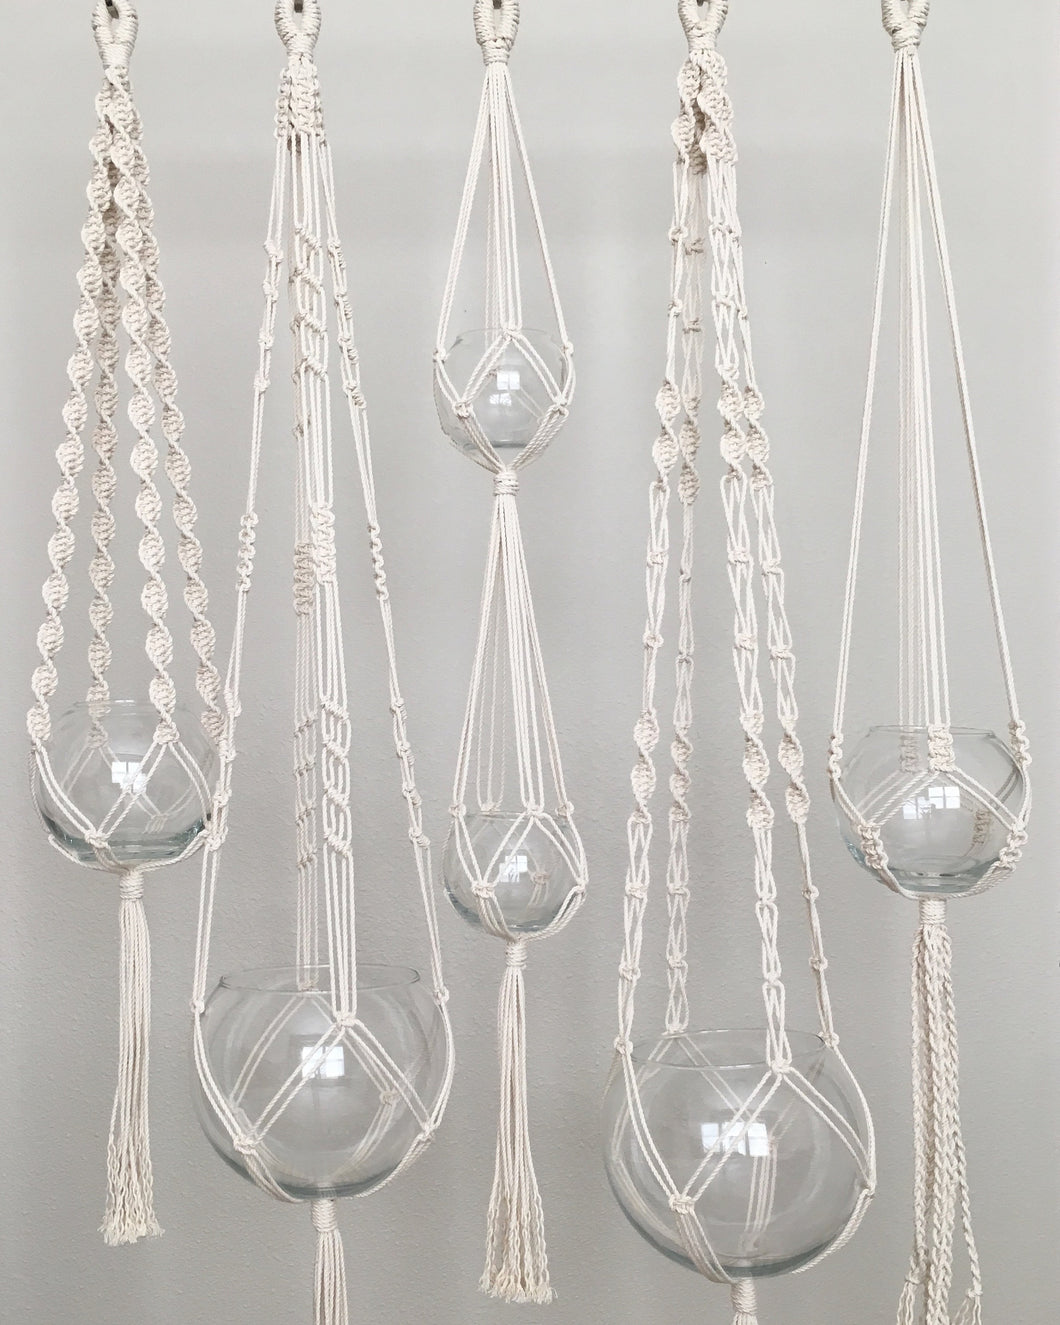 Set of 5 macrame plant hangers with glass vases included